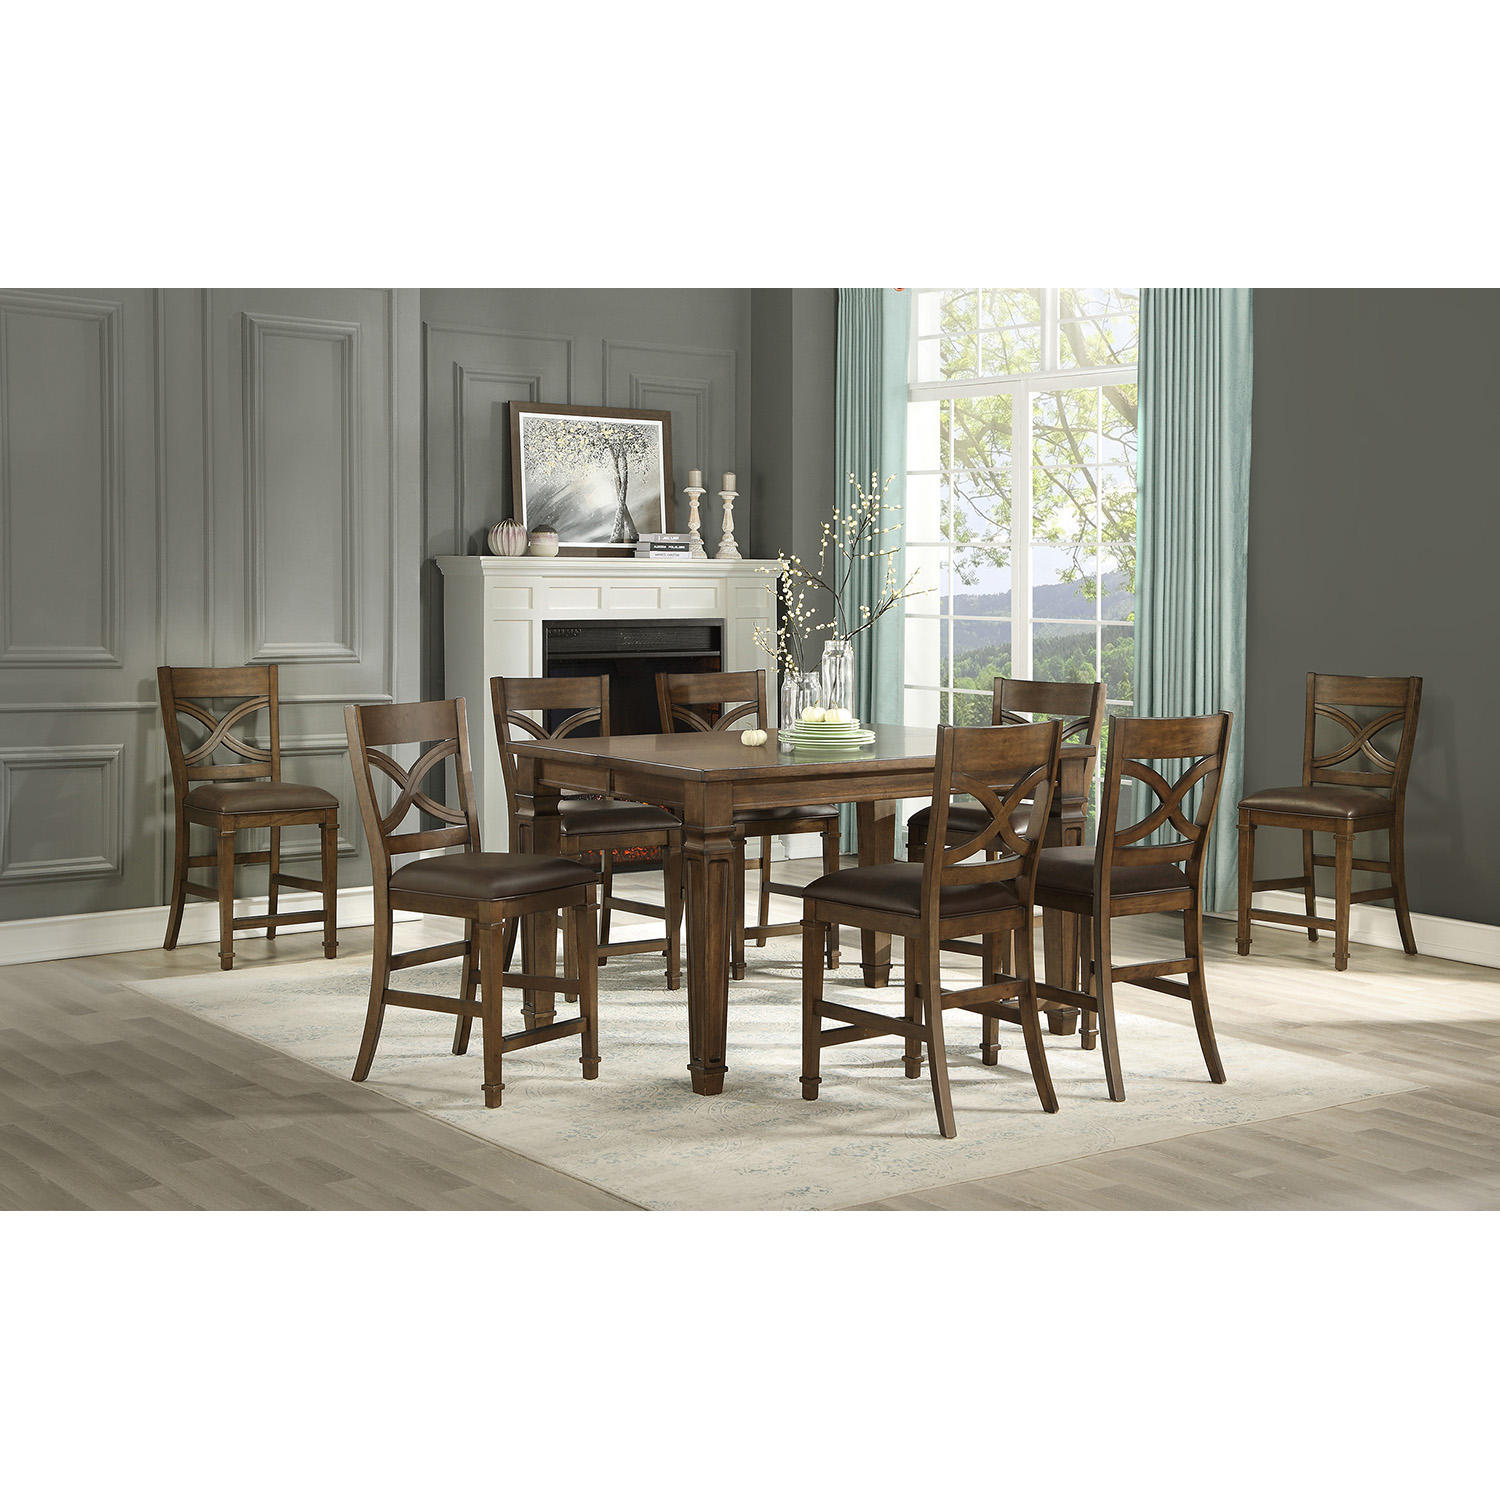 Member’s Mark Theodore 9 Piece Counter-height Dining Set